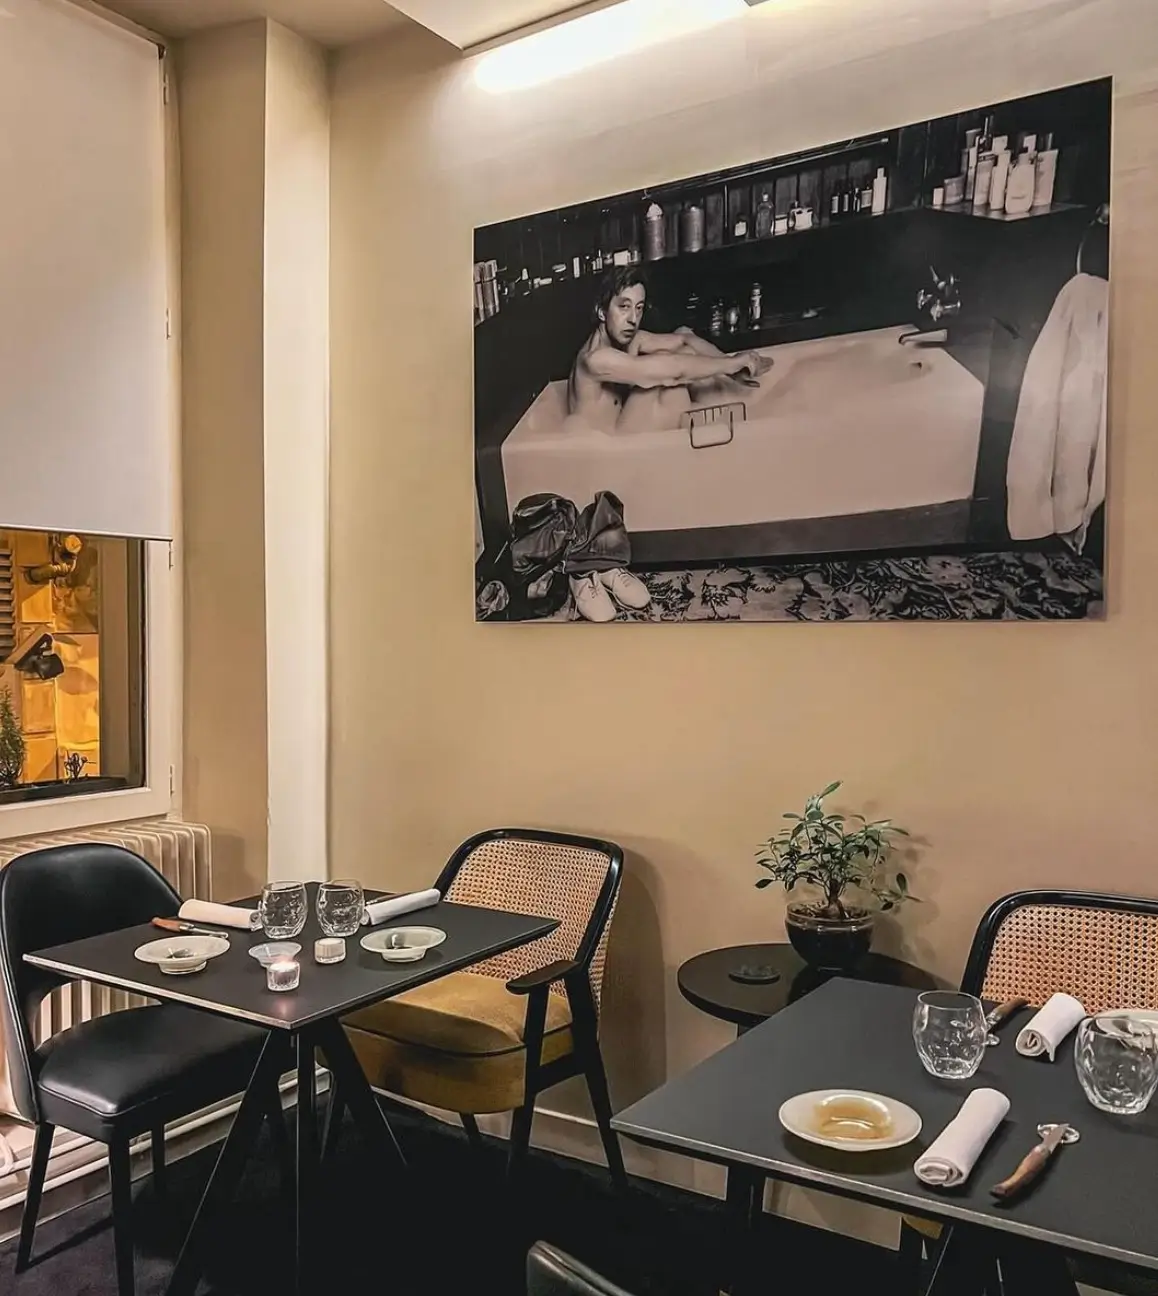 Cozy dining area at Fleur de Pavé in Paris, featuring a black and white photo of a person in a bathtub on the wall.